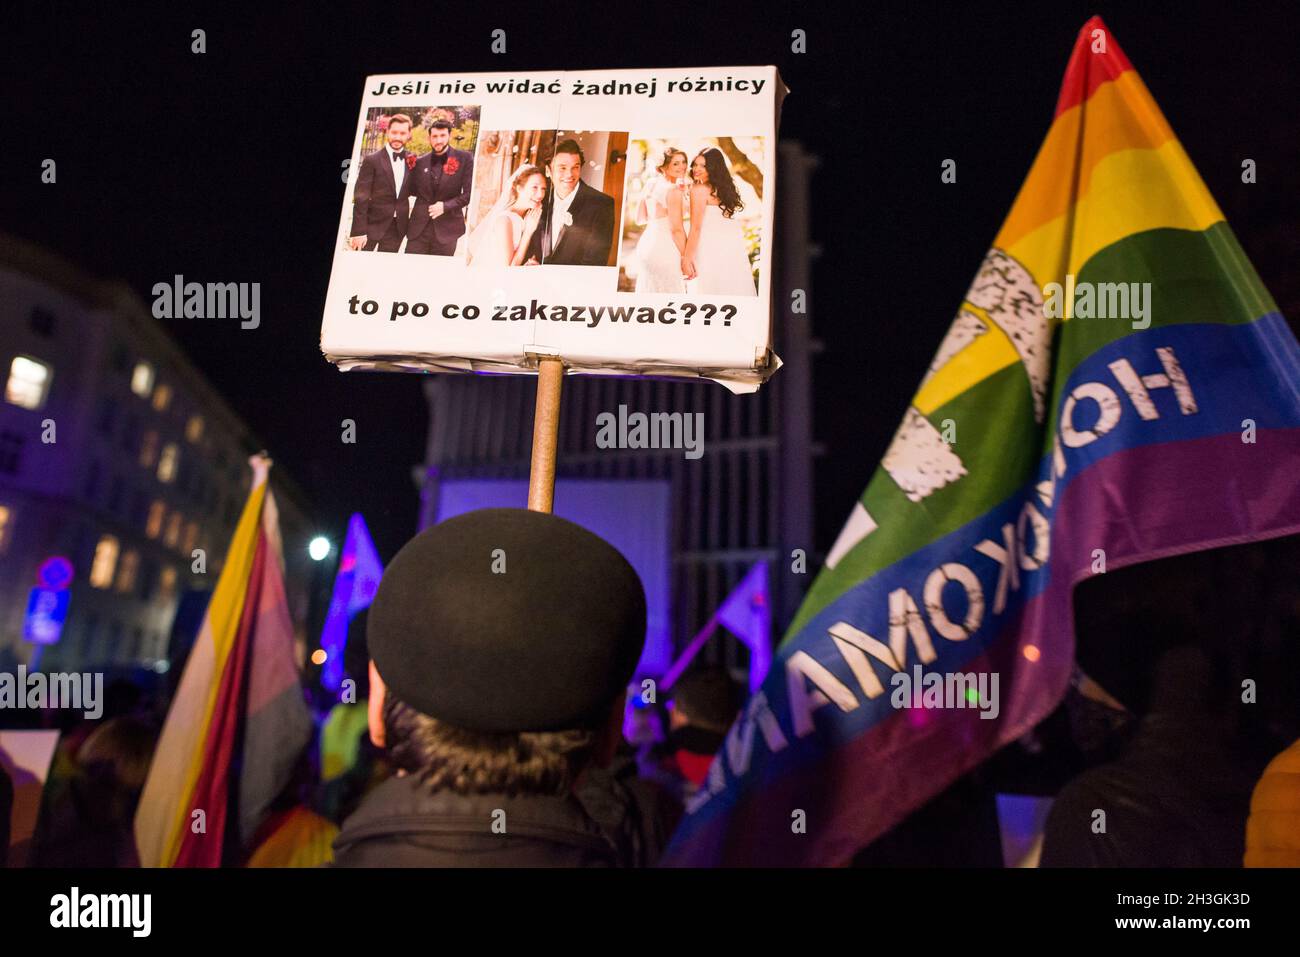 Protesters hold placards and rainbow flags expressing their opinion during the demonstration.People gathered outside the Polish Parliament in Warsaw to protest against a law proposal that would put a total ban on equality marches. If the so called “Stop LGBT” bill is passed, prides and equality marches will be banned, as well as any other public gatherings that “promote” non-heterosexual orientations and heterosexual gender identities. Today in the Parliament's lower house a discussion was held on this project, and a vote is scheduled for 29th of October. 'Stop LGBT' is a civic bill for which Stock Photo